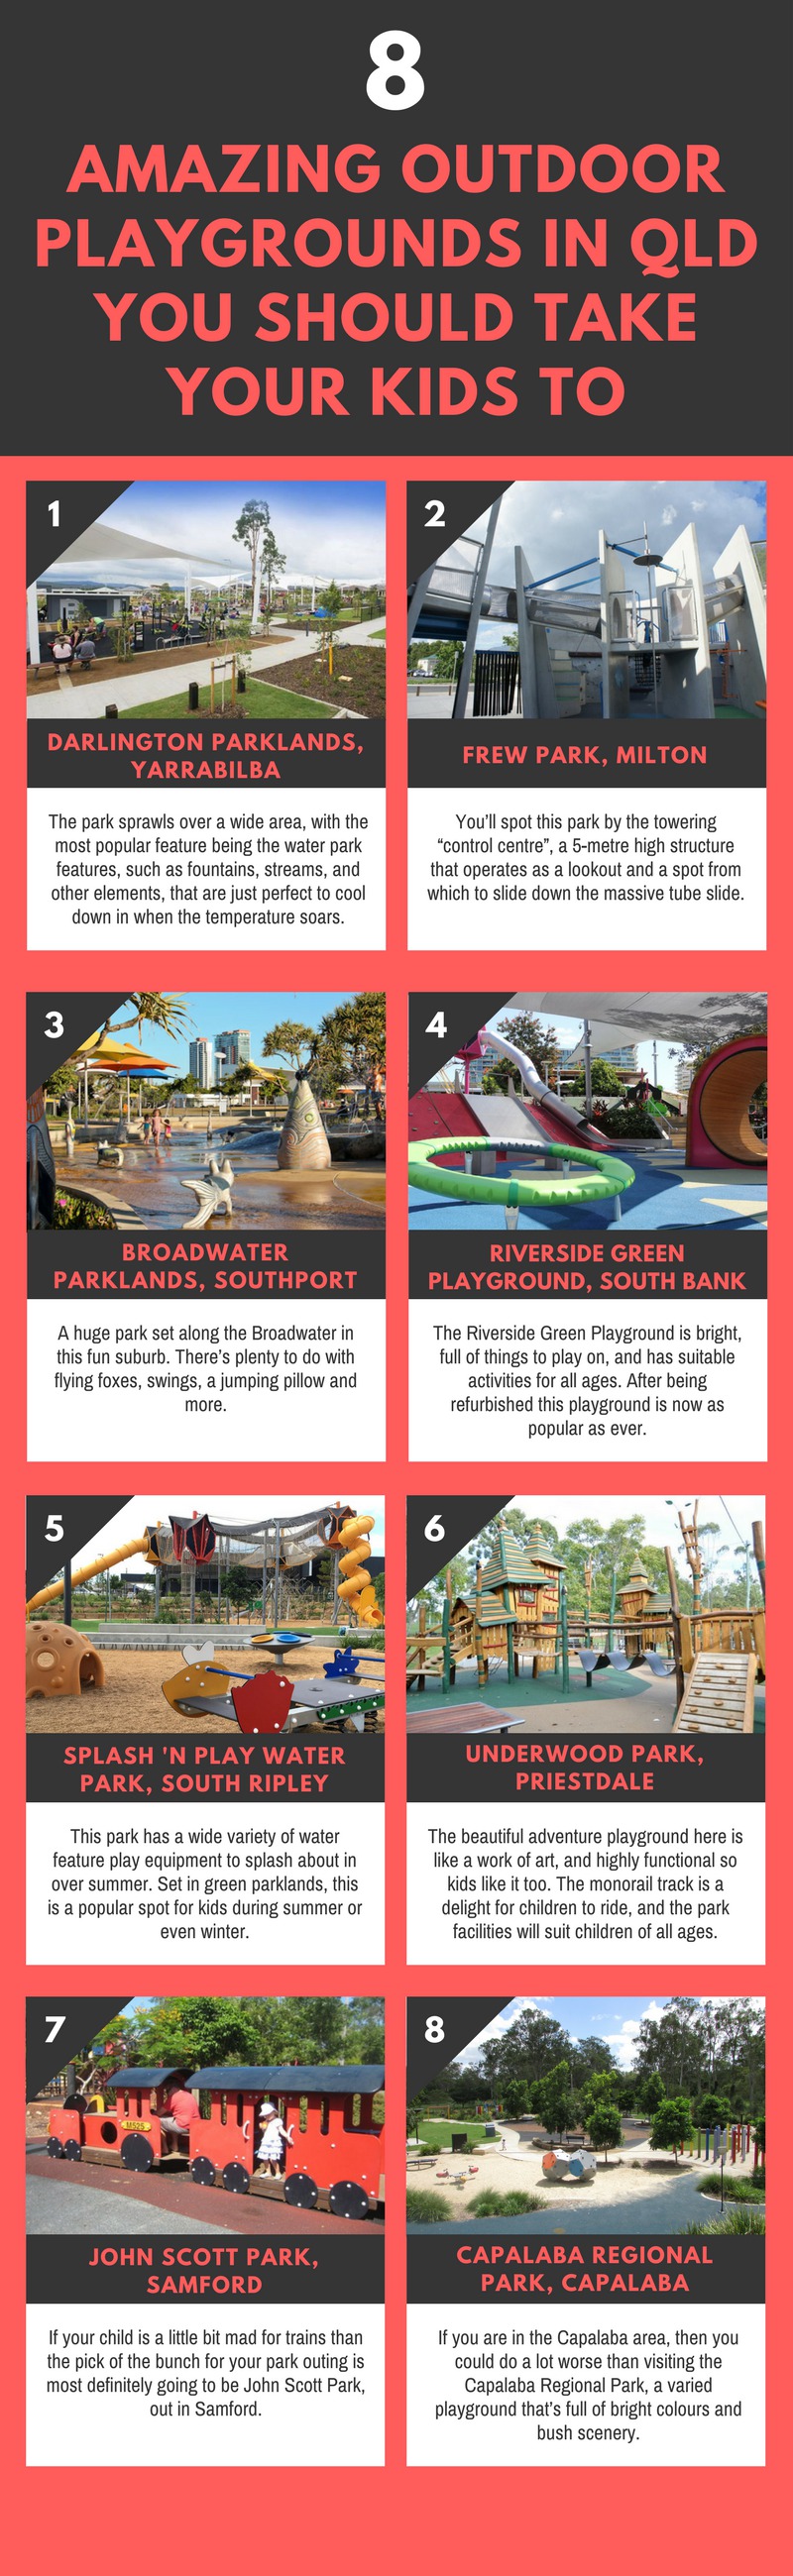 8 Amazing Outdoor Playgrounds in QLD You Should Take Your Kids To